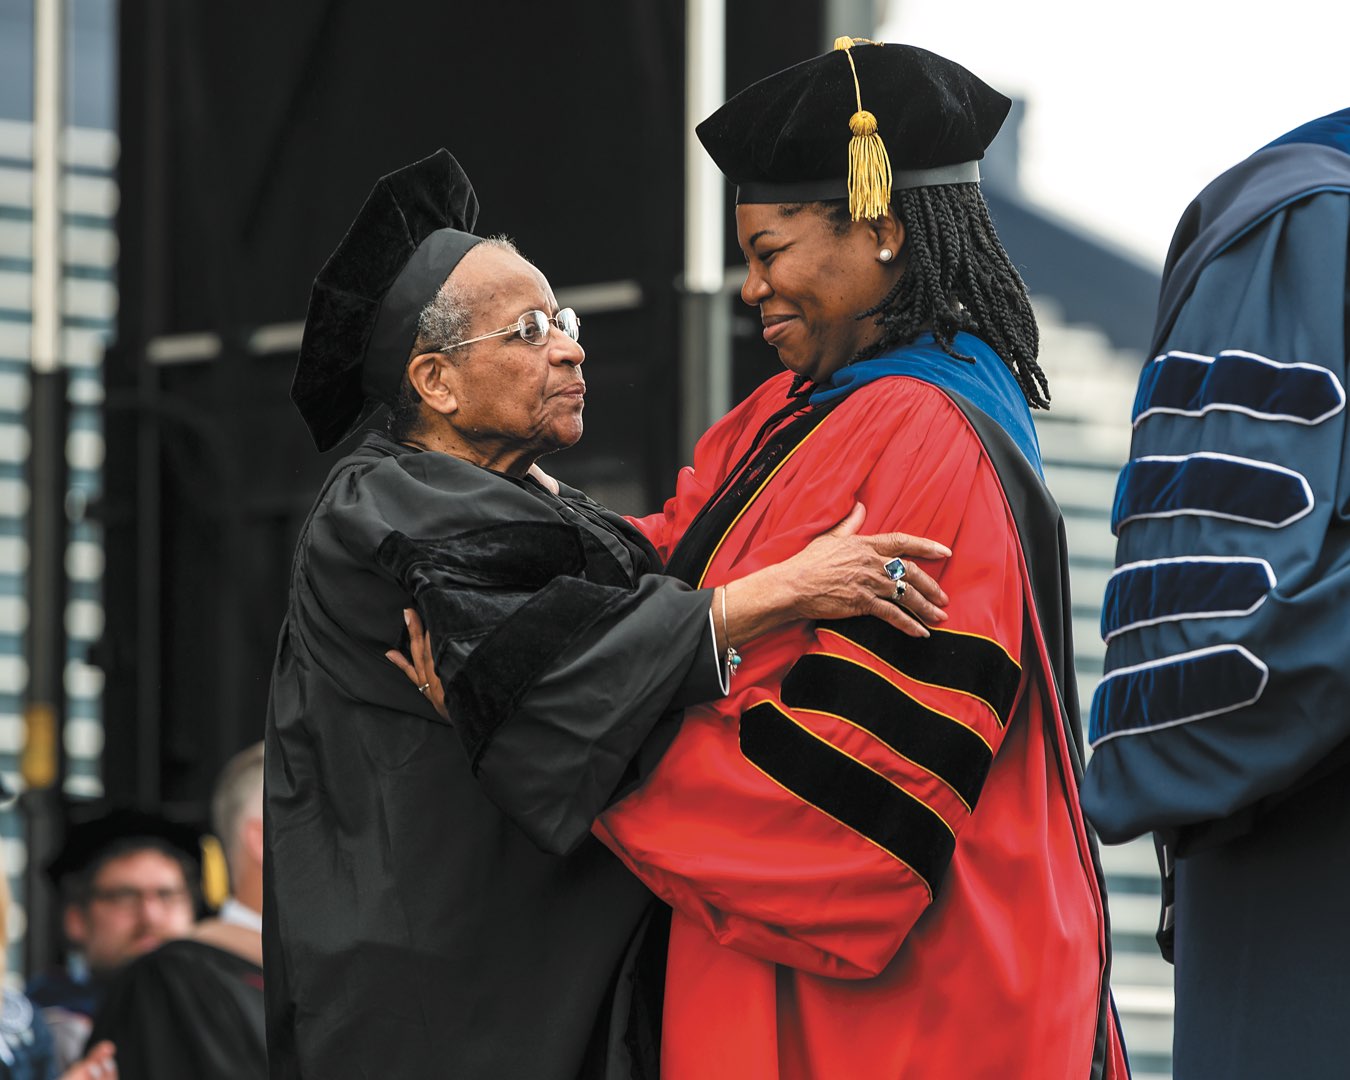 Sister Cora Marie and Dr. Shannen Dee Williams embracing at Commencement in graduation regalia